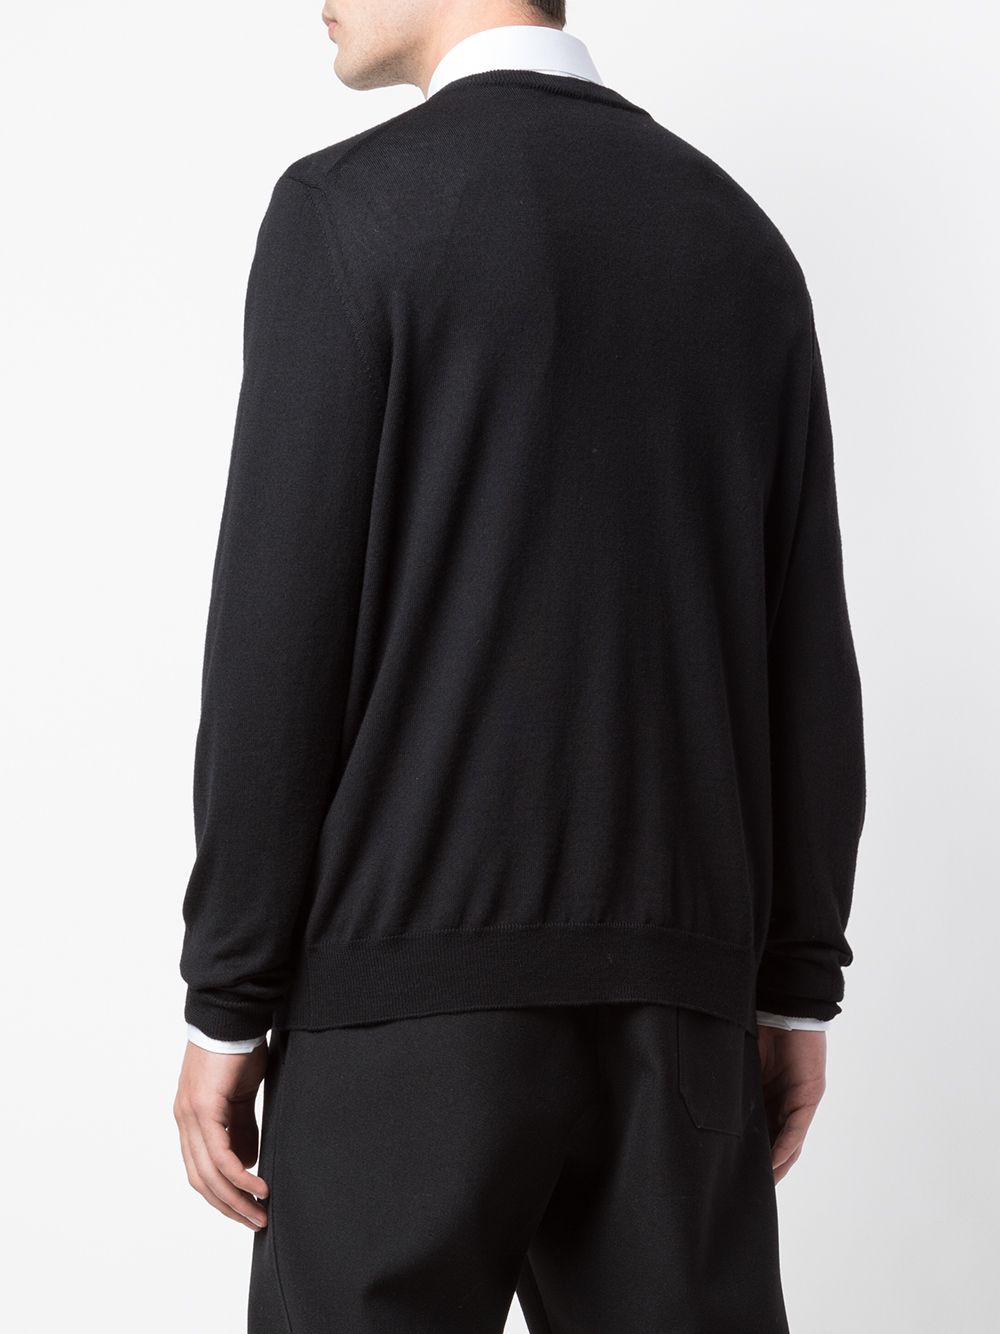 Shop Wardrobe.nyc X The Woolmark Company Release 05 Knitted Cardigan In Black